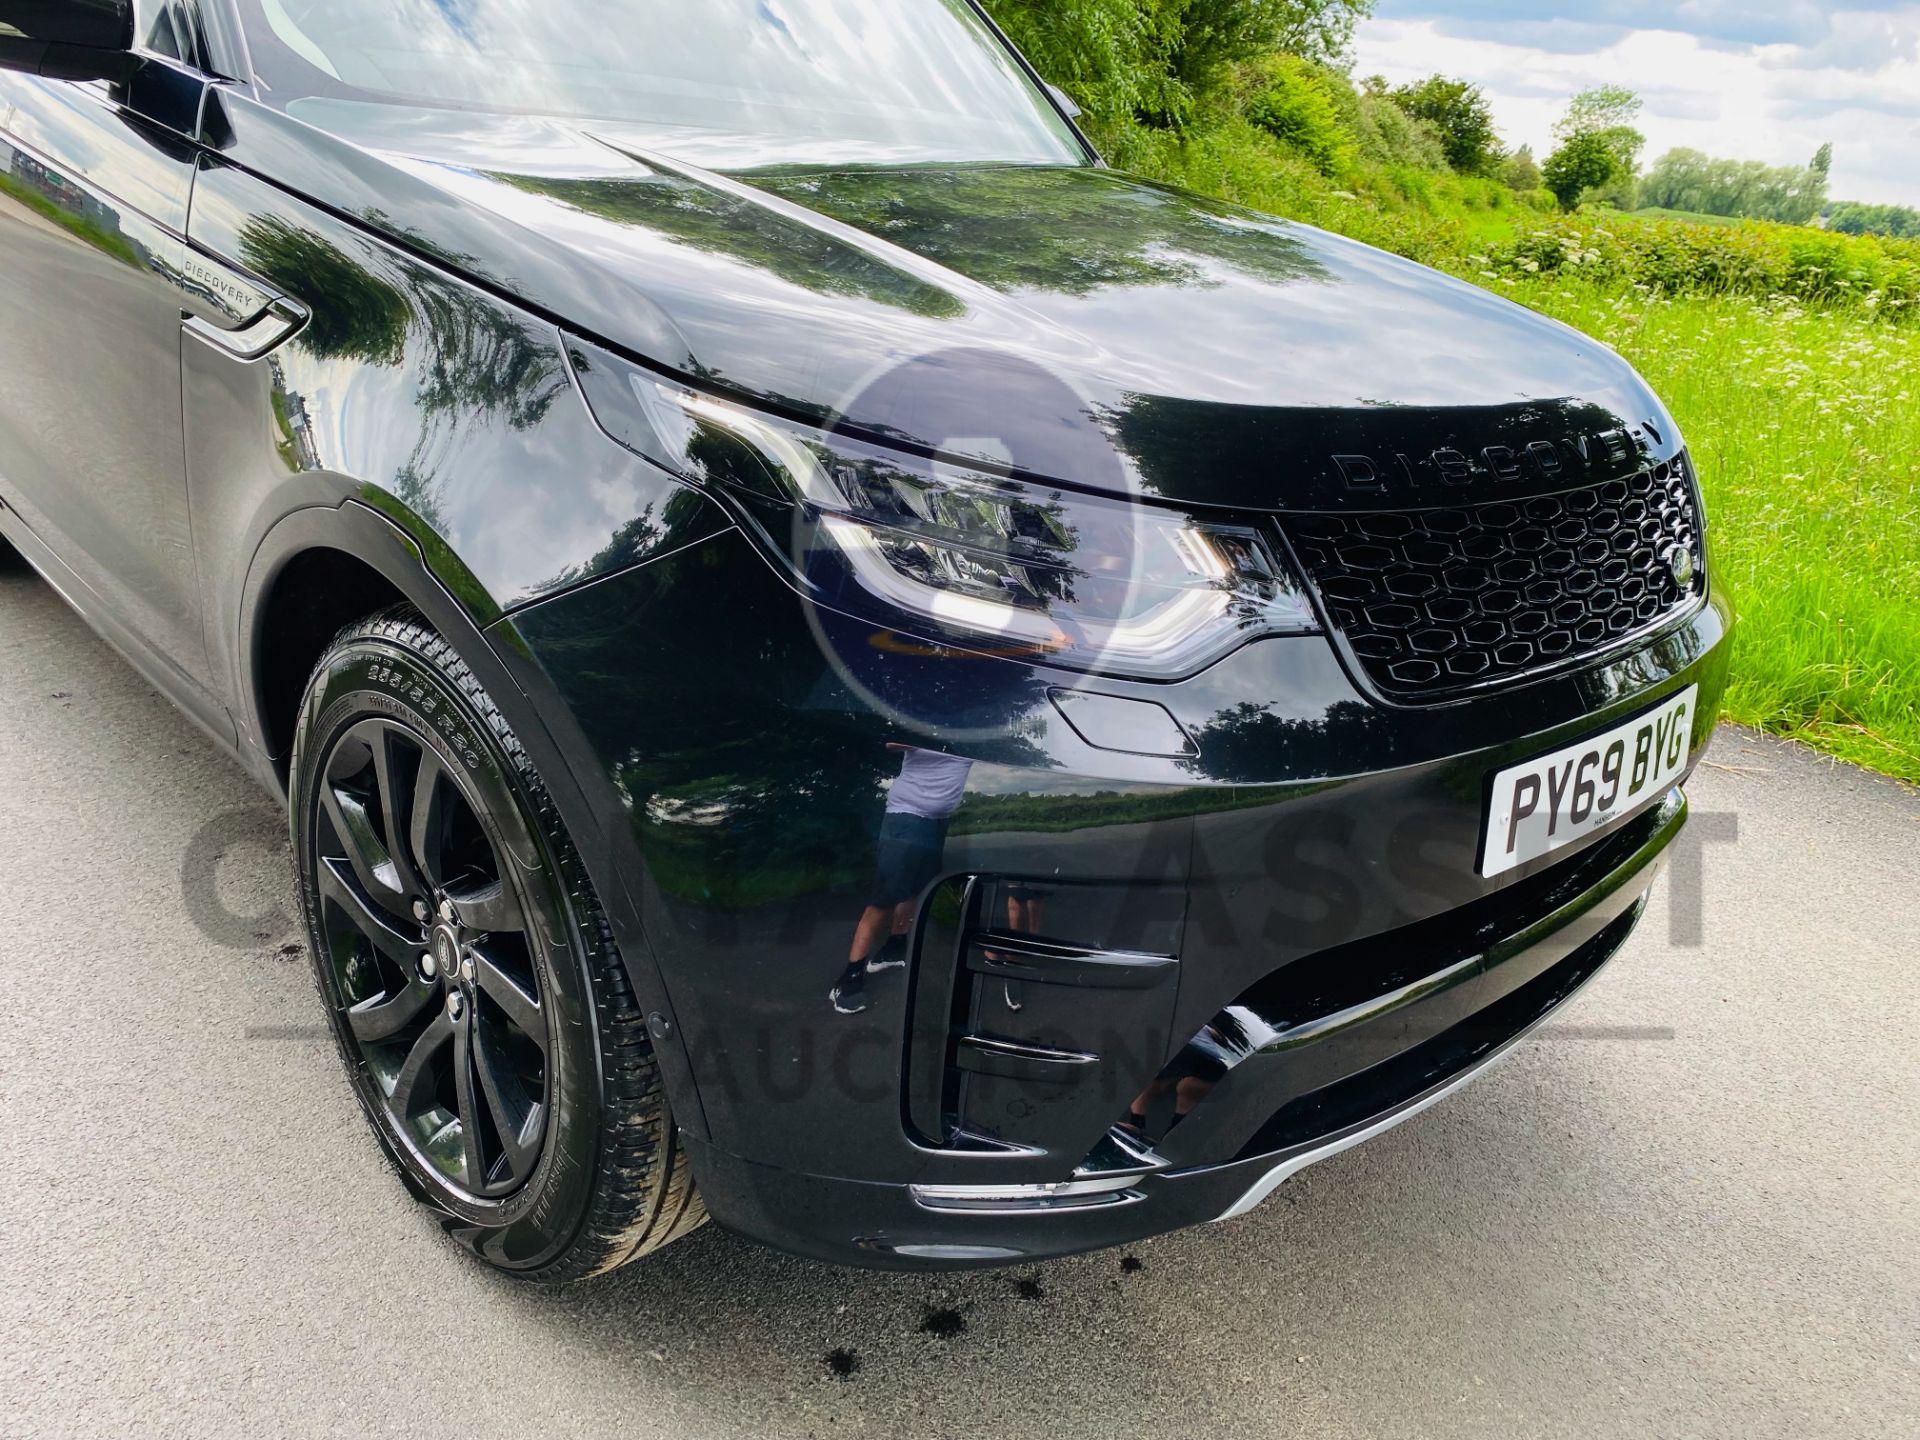 LAND ROVER DISCOVERY 5 *LANDMARK* 7 SEATER SUV (2020 - EURO 6) 3.0 SD6 - 8 SPEED AUTO *FULLY LOADED* - Image 15 of 63